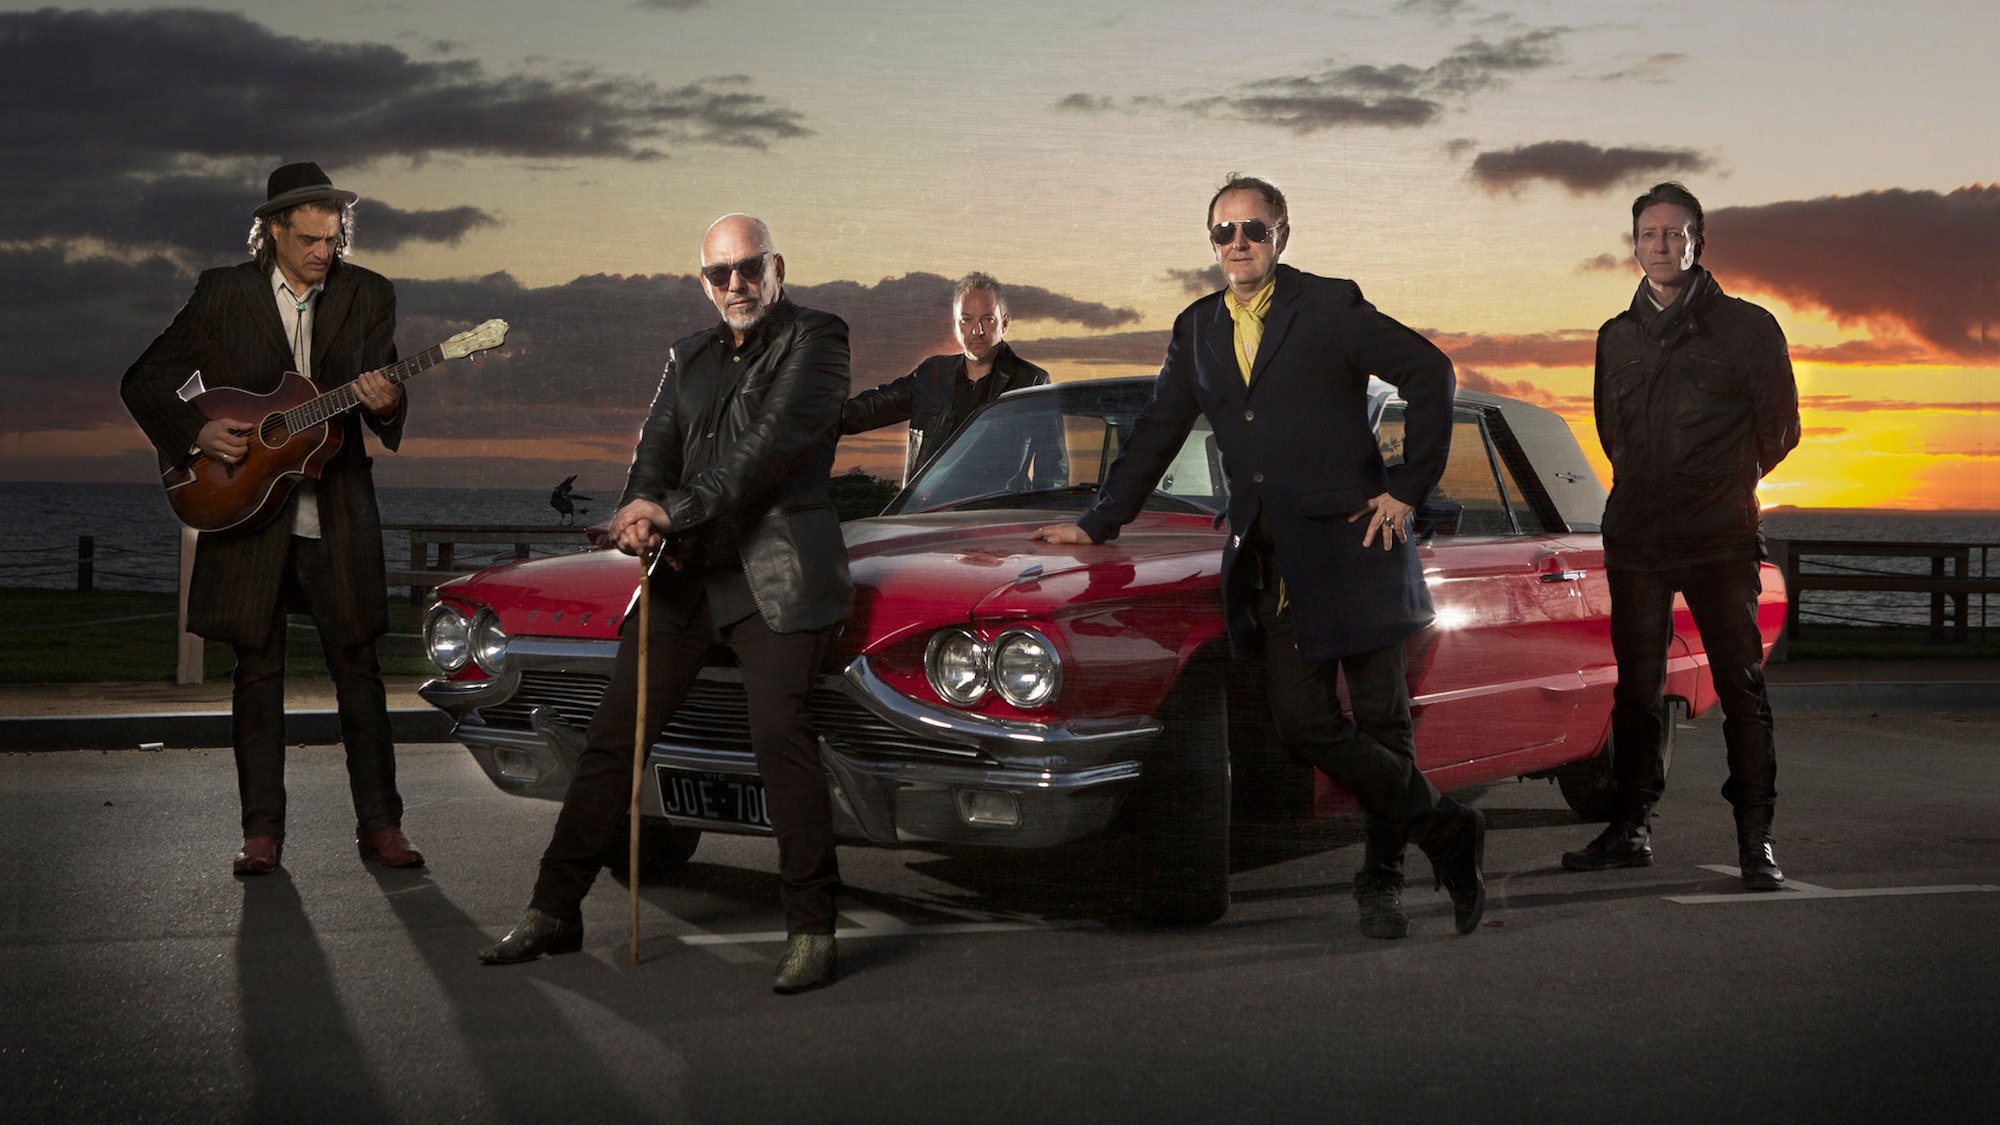 The Black Sorrows and First Beige top the community radio charts